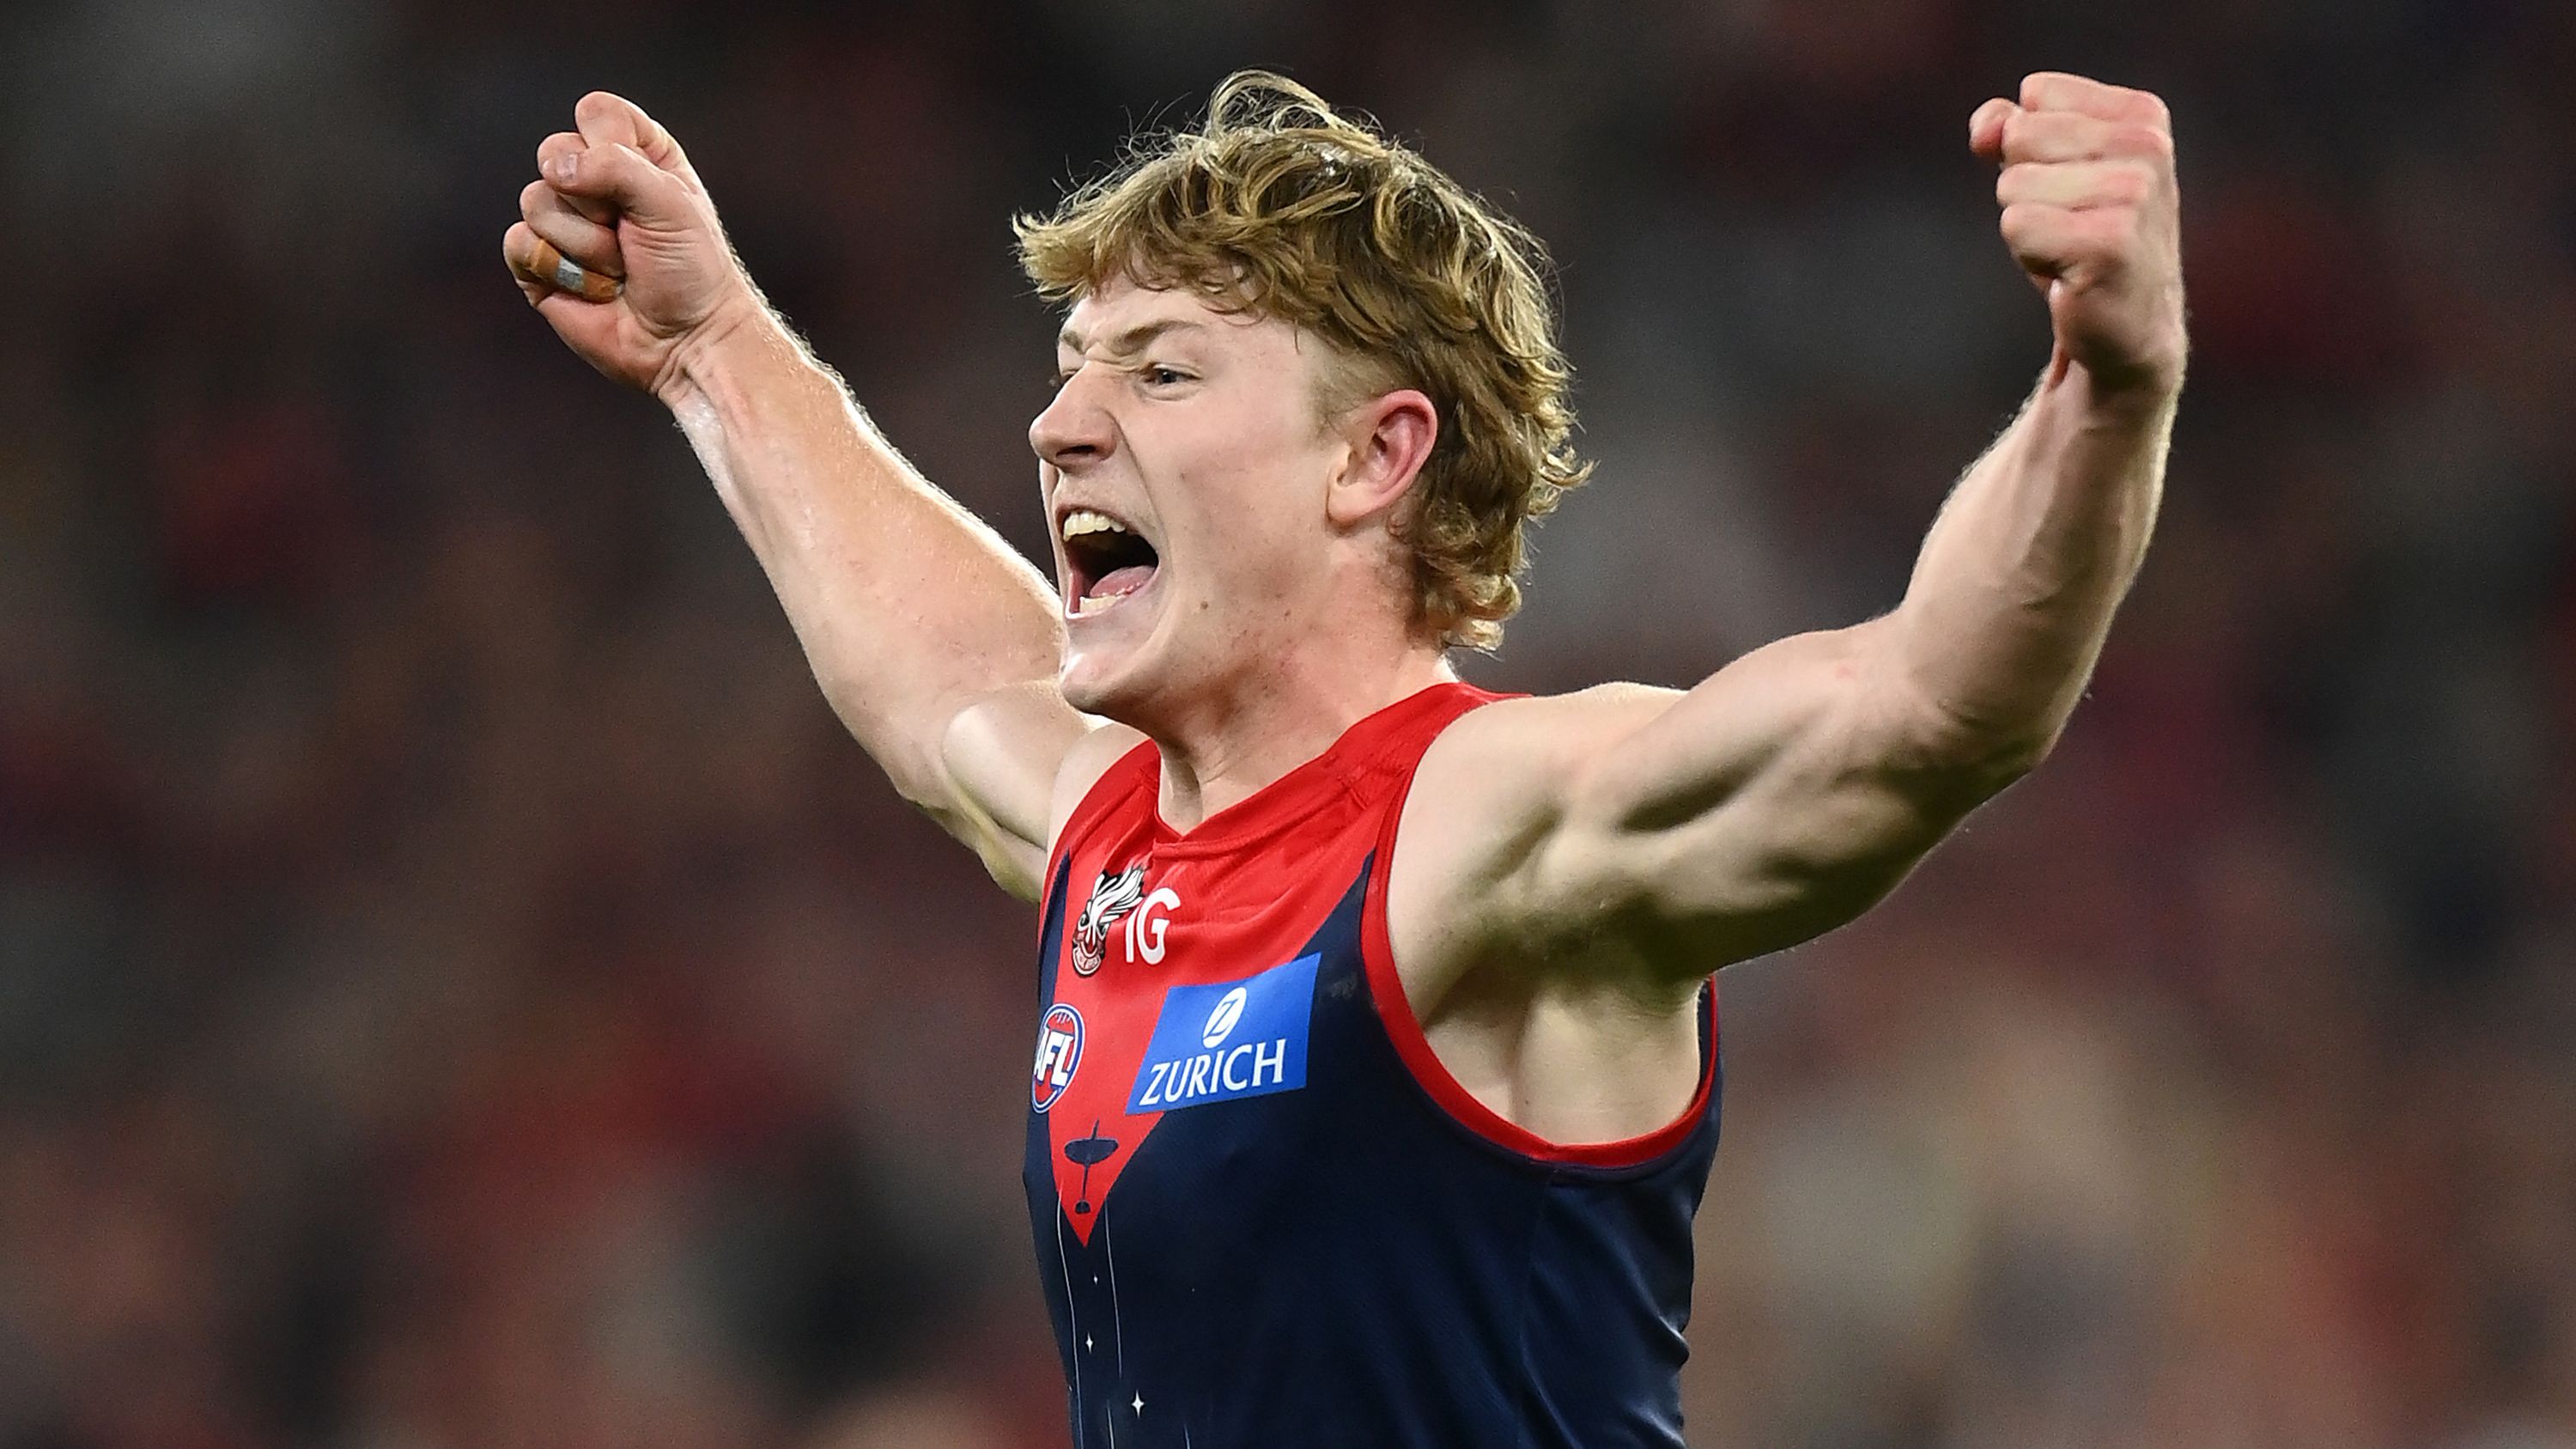 MELBOURNE, AUSTRALIA - APRIL 24: Jacob Van Rooyen of the Demons celebrates kicking a goal during the round six AFL match between Melbourne Demons and Richmond Tigers at Melbourne Cricket Ground, on April 24, 2023, in Melbourne, Australia. (Photo by Quinn Rooney/Getty Images)